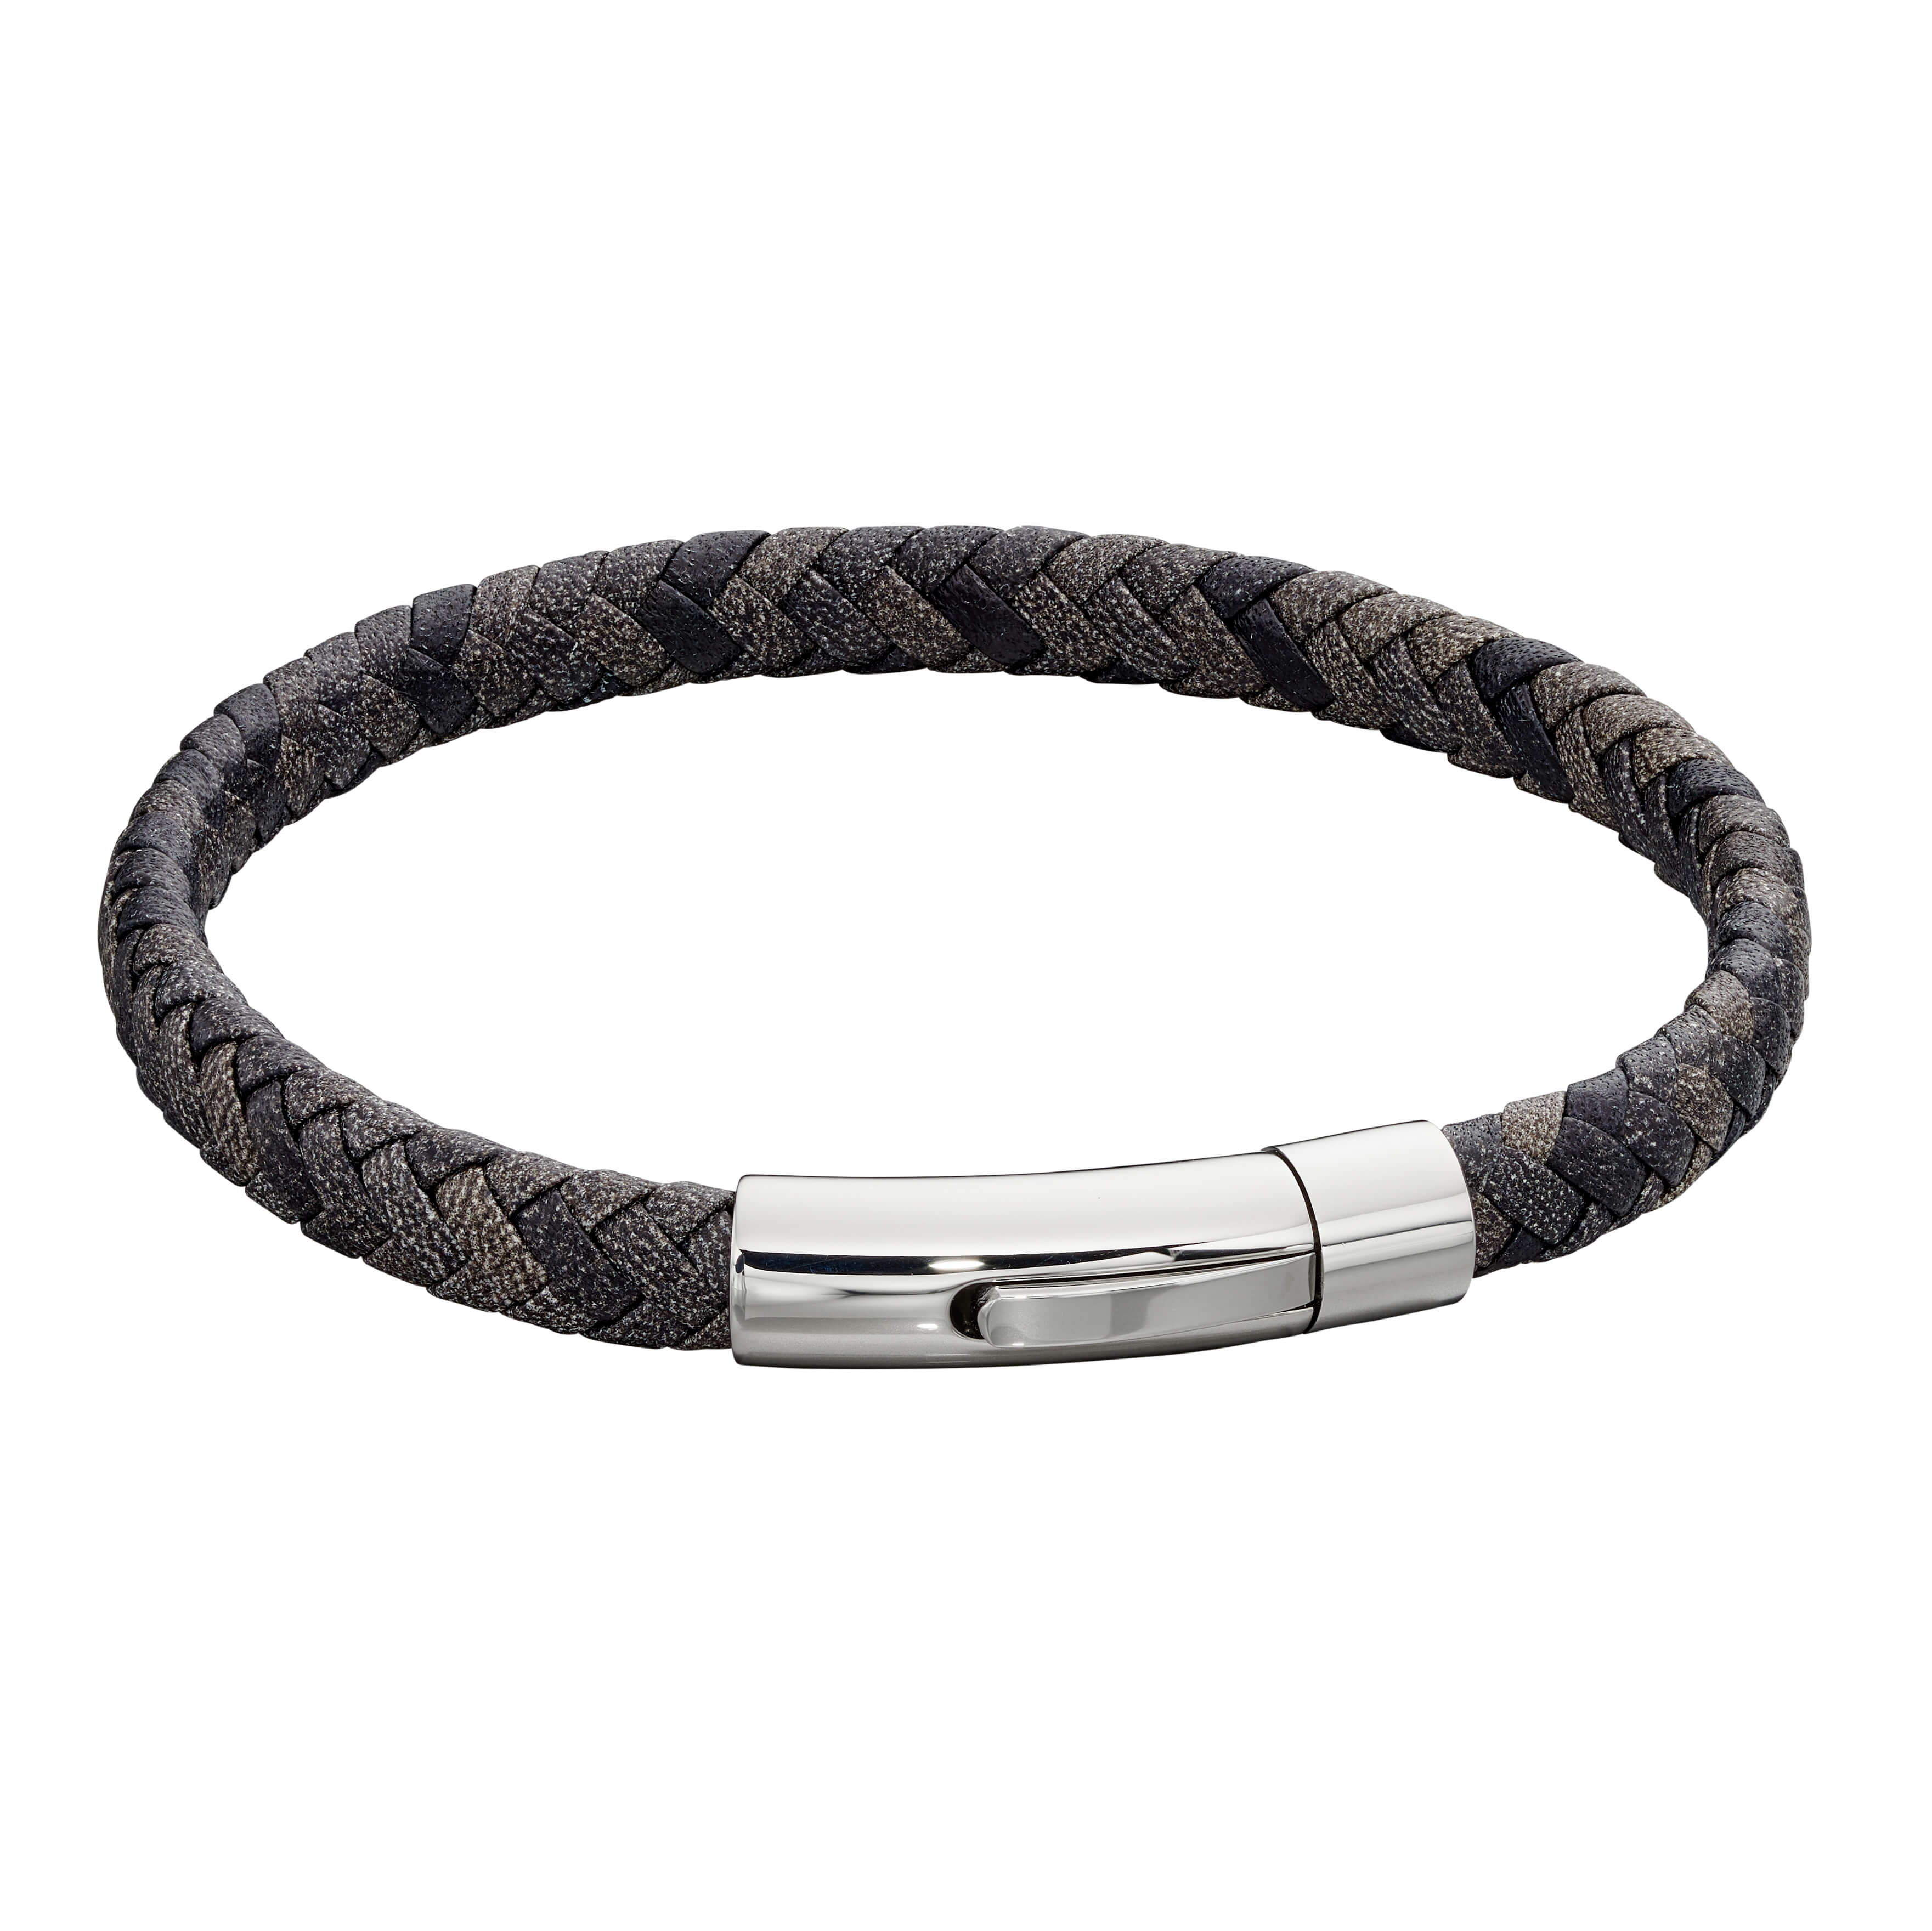 Stainless Steel & Grey Woven Leather Bracelet - FB0029 - Hallmark Jewellers Formby & The Jewellers Bench Widnes